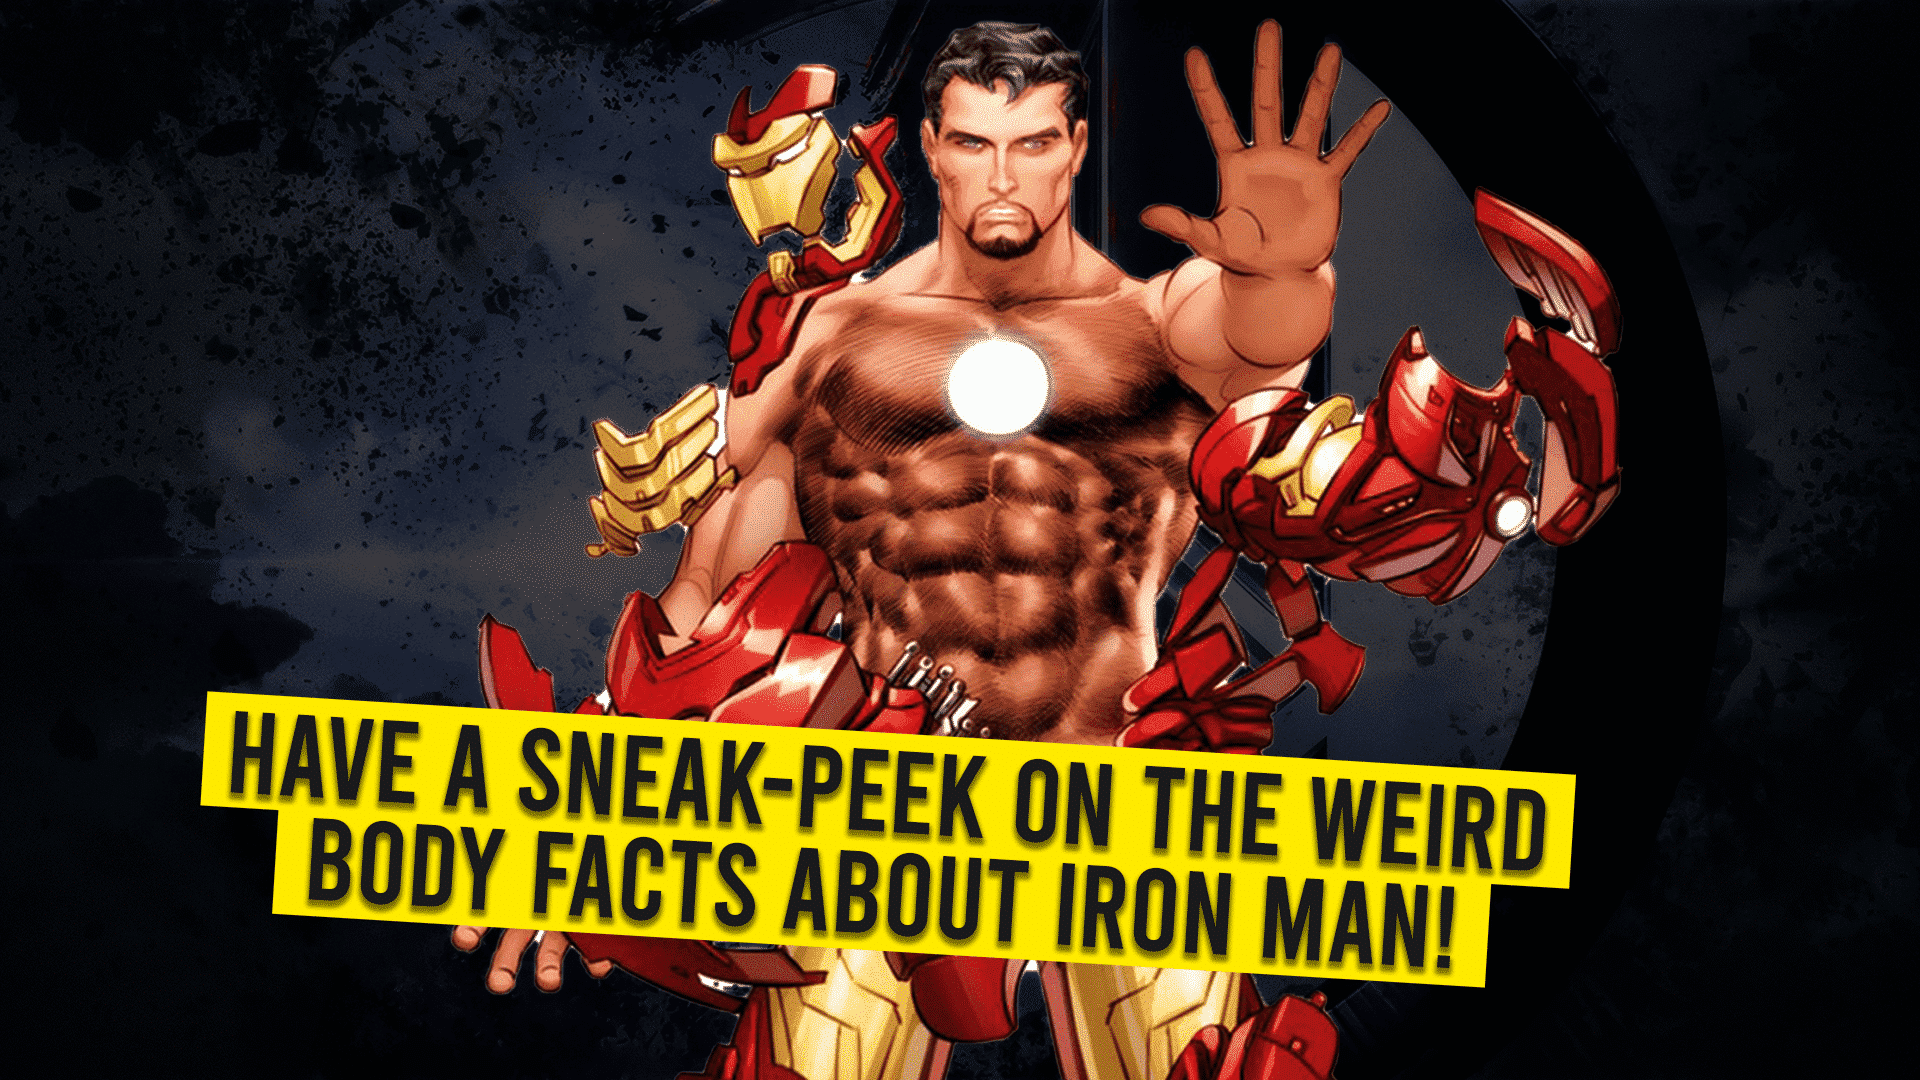 Have A Sneak-Peek On The Weird Body Facts About Iron Man!